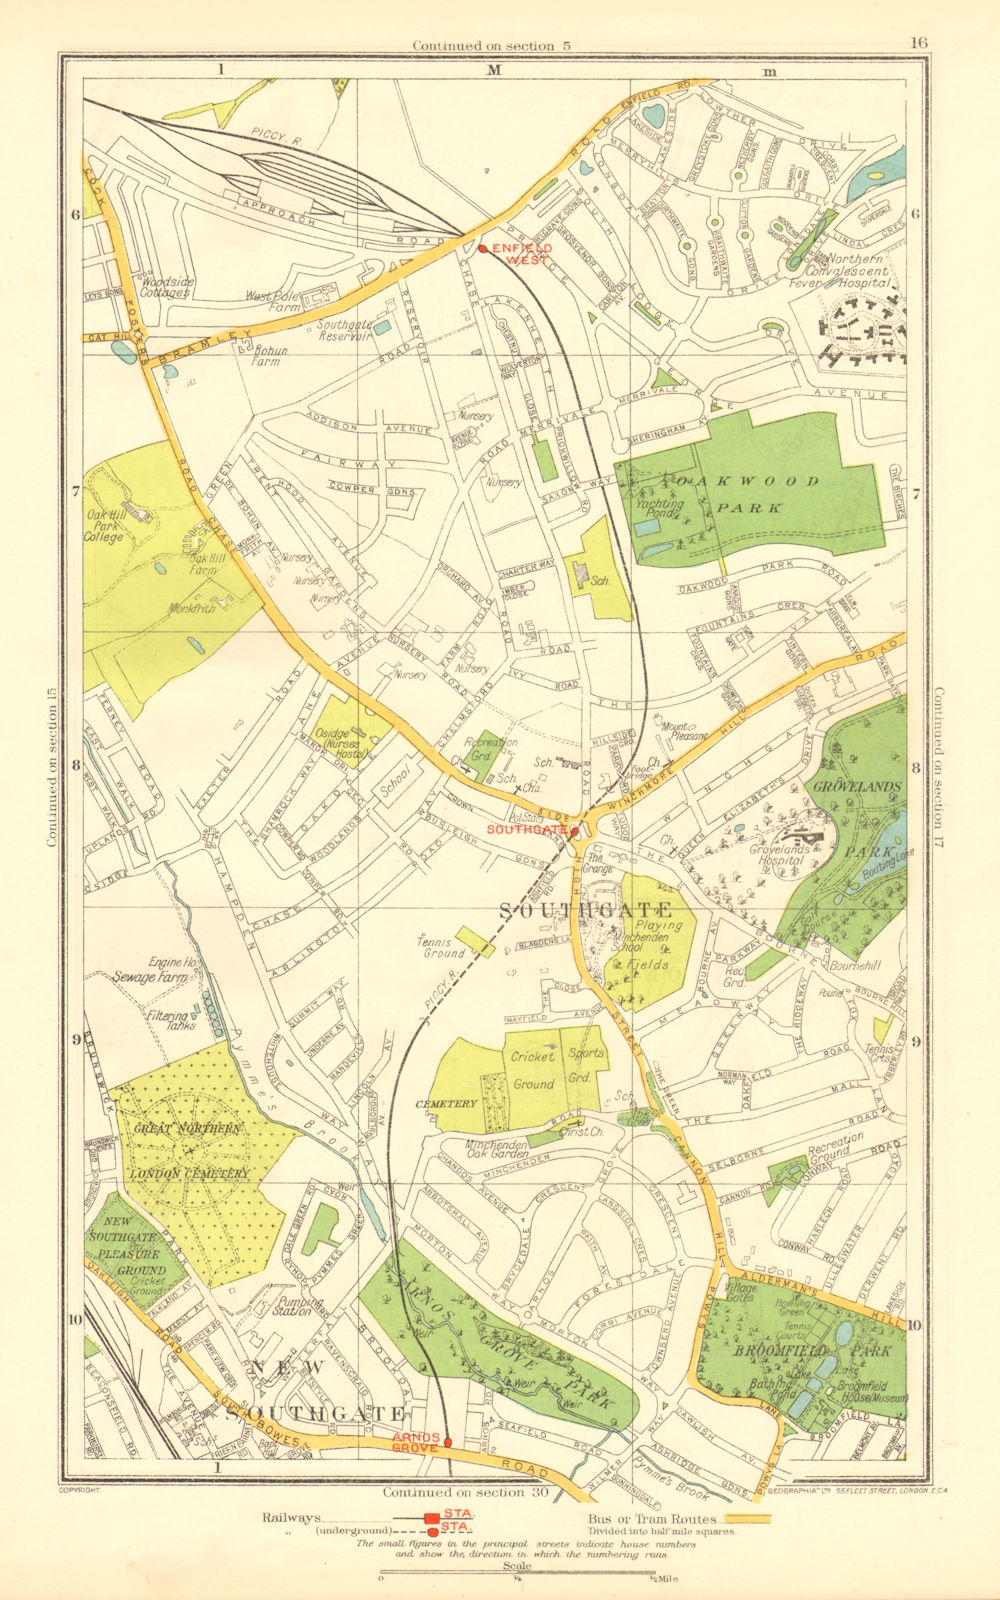 Associate Product LONDON. Southgate New Southgate Arnos Grove West Enfield 1937 old vintage map